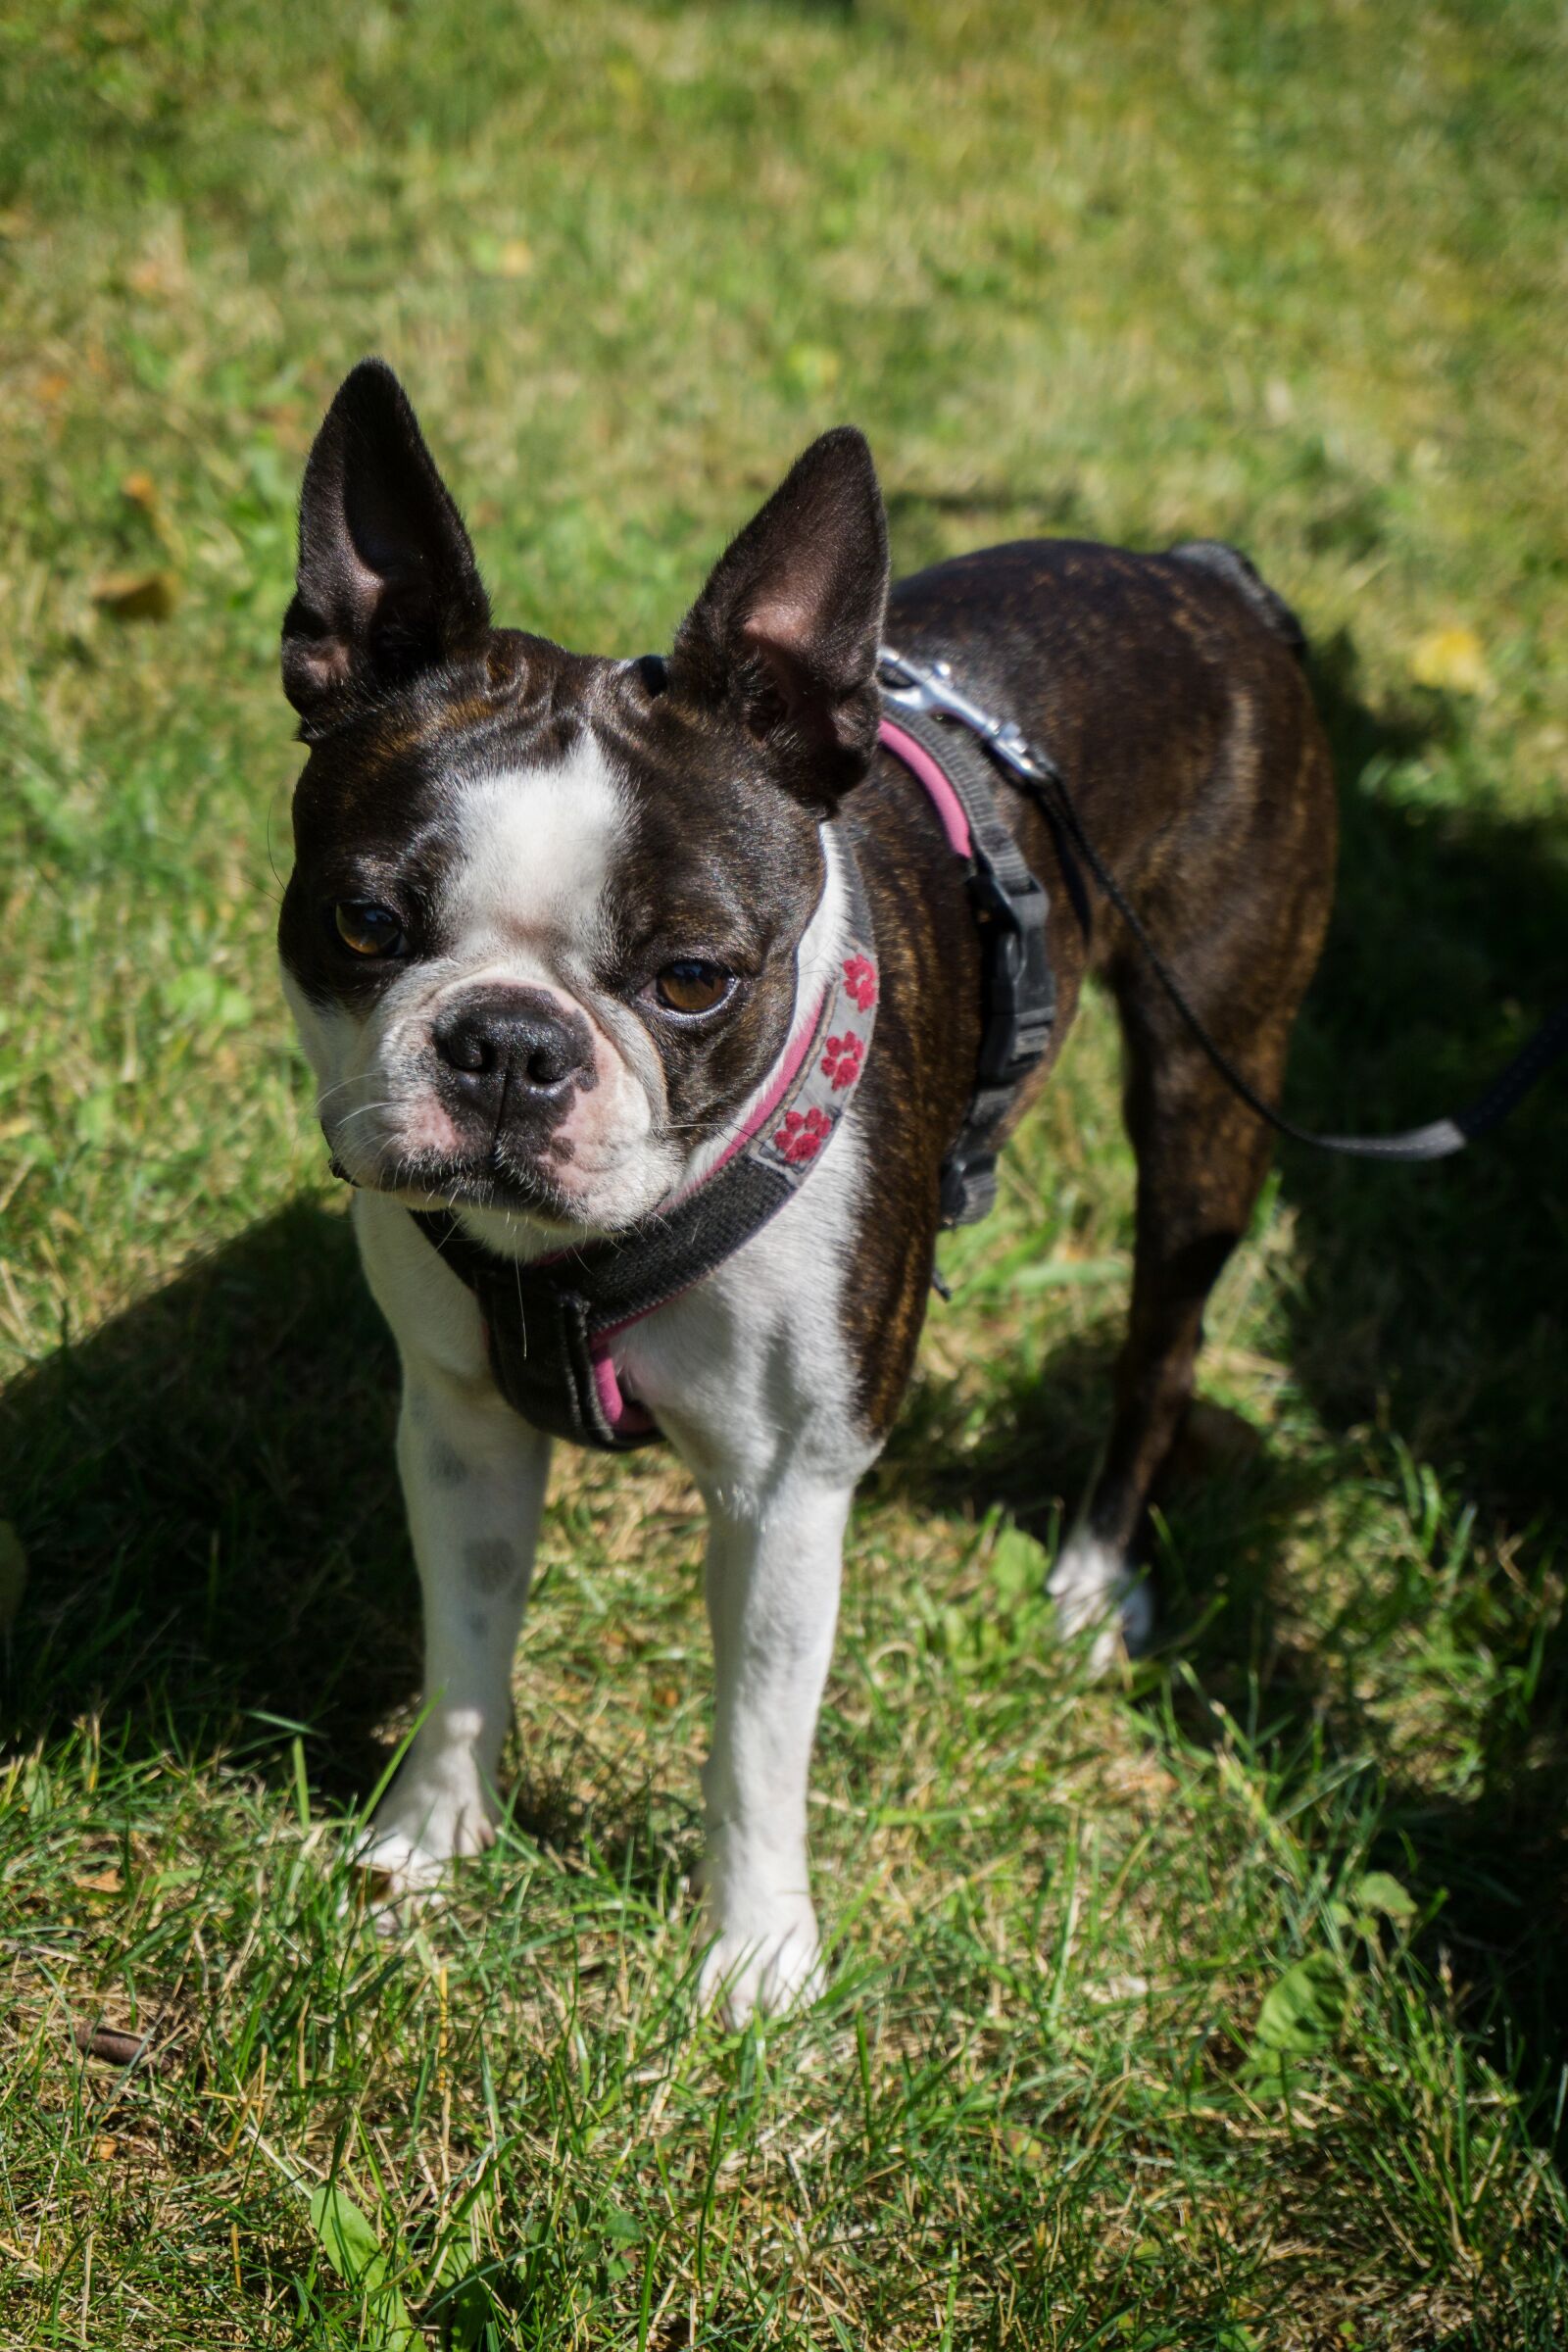 Sony a6000 sample photo. Dog, boston terrier, pet photography